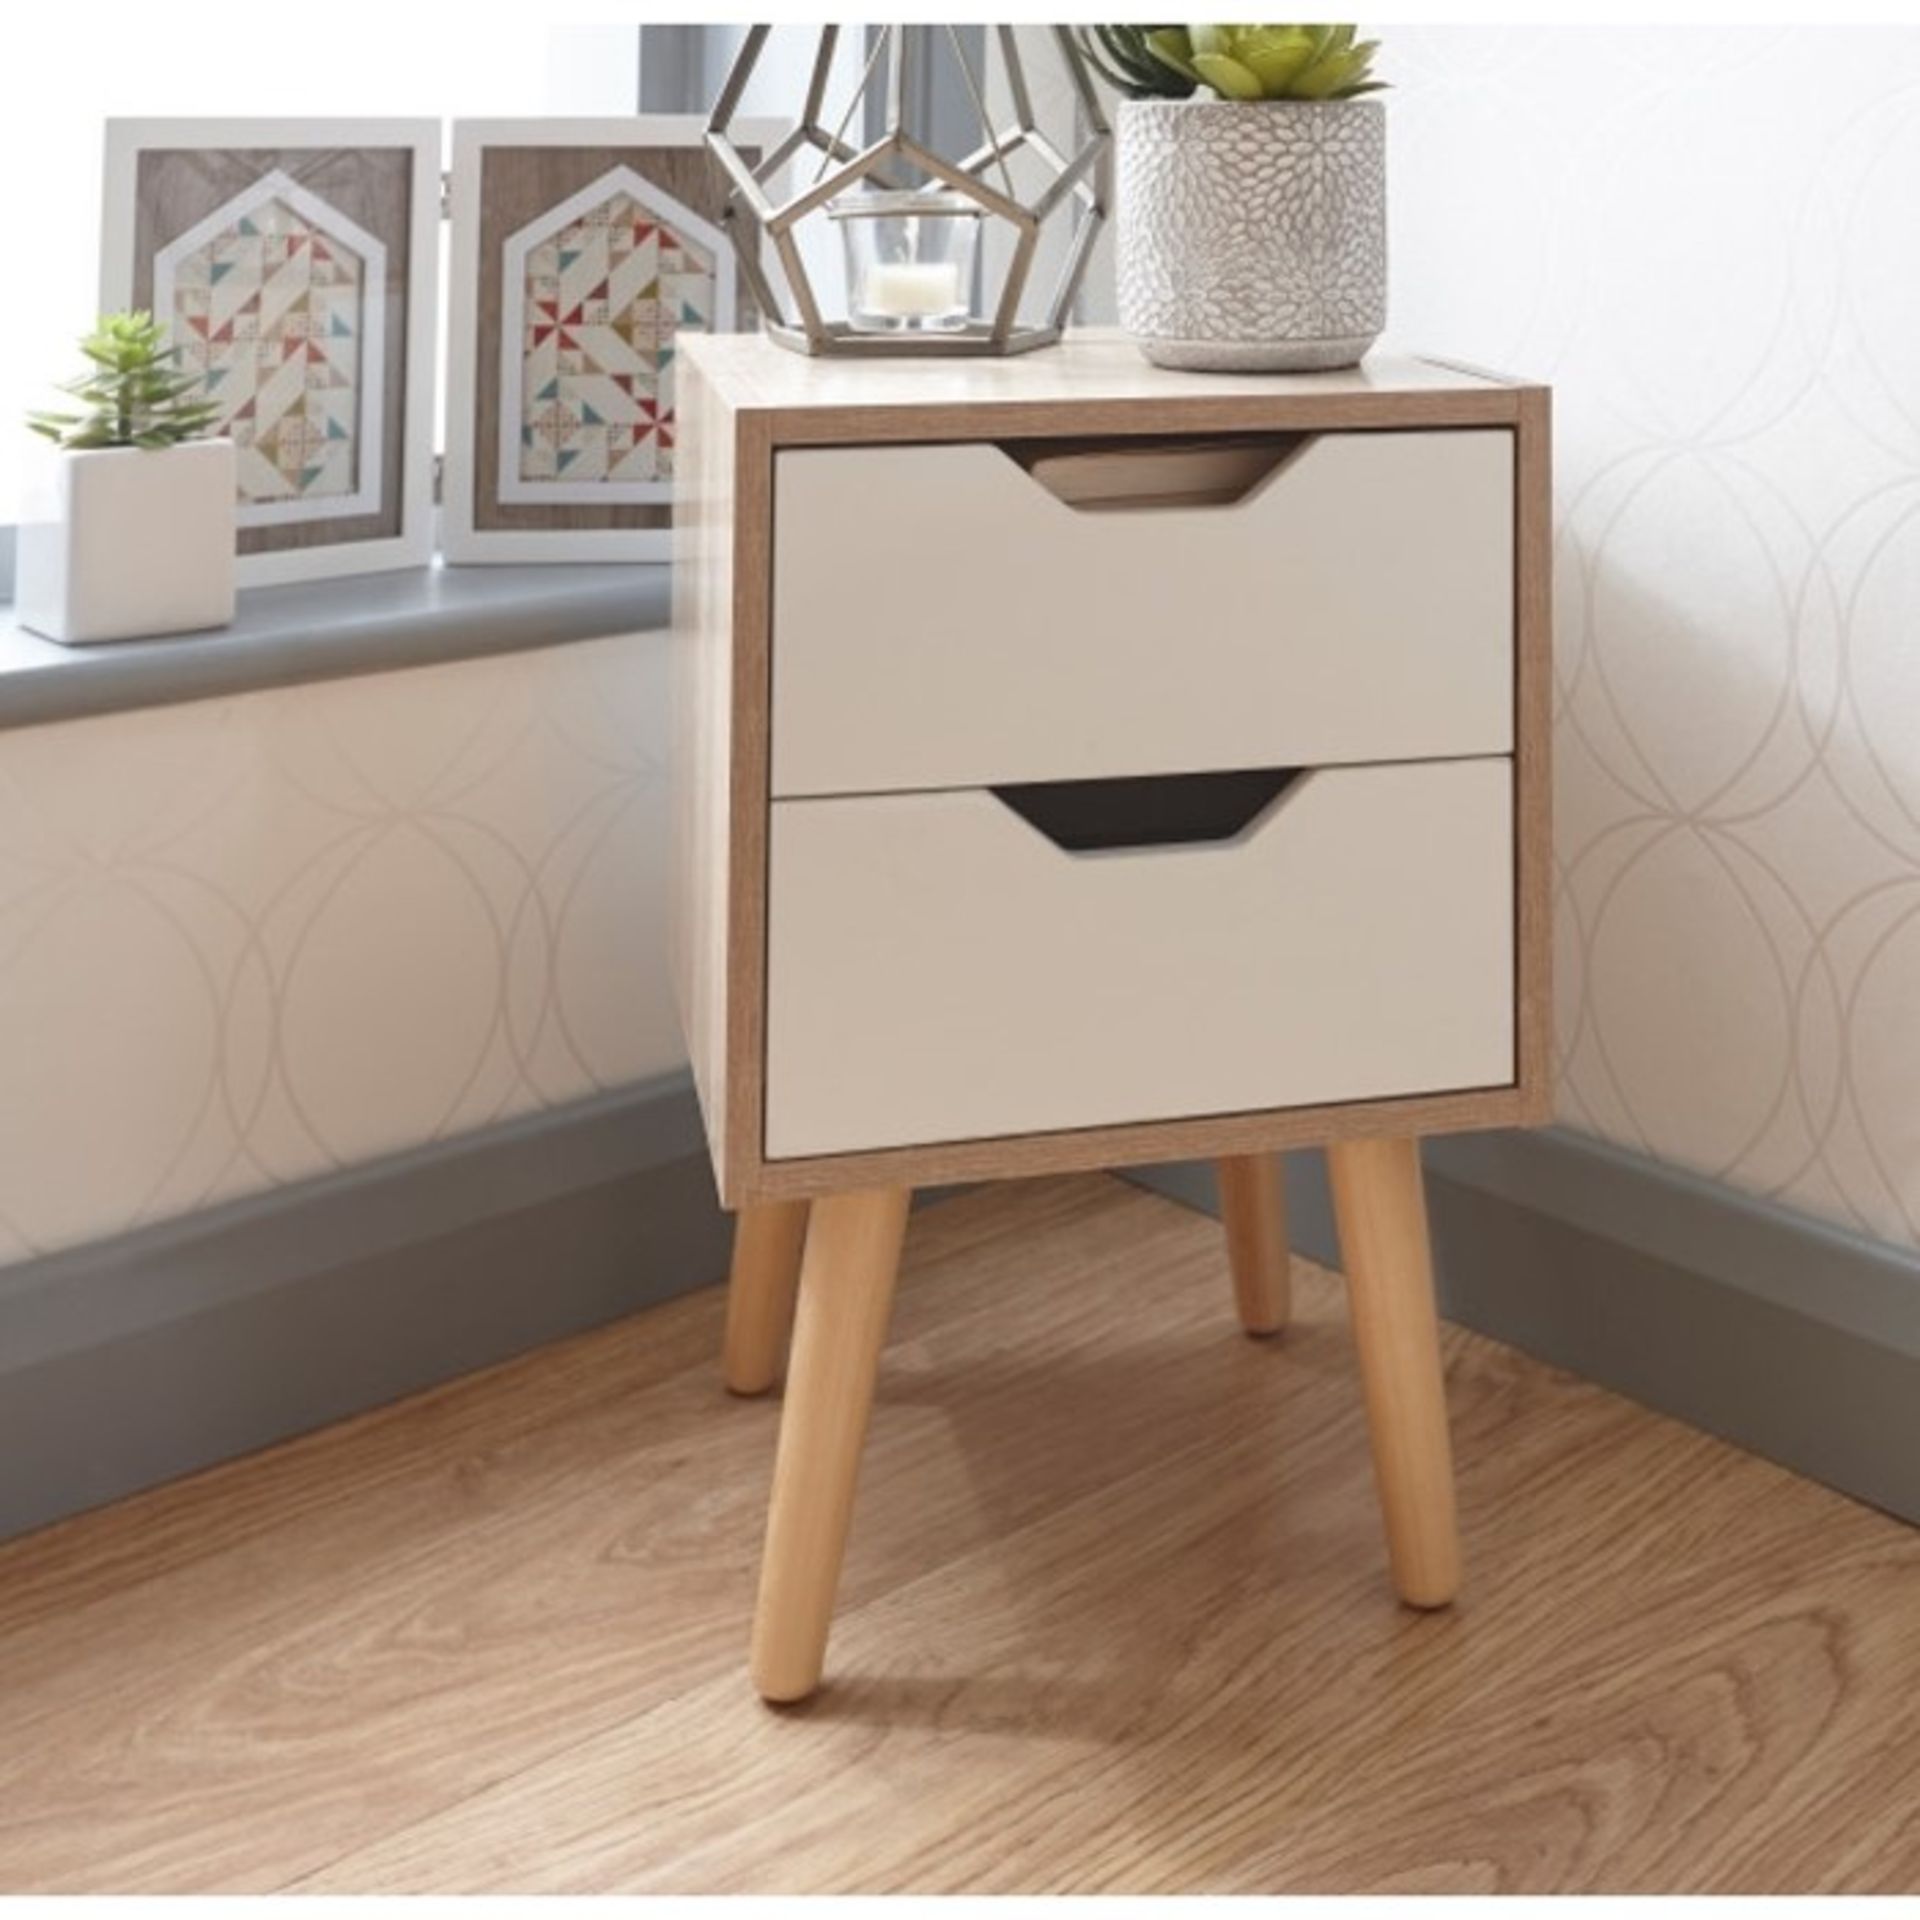 2 BOXED STOCKHOLM 2 DRAWER SIDE TABLES IN WHITE AND OAK (PUBLIC VIEWING AVAILABLE)